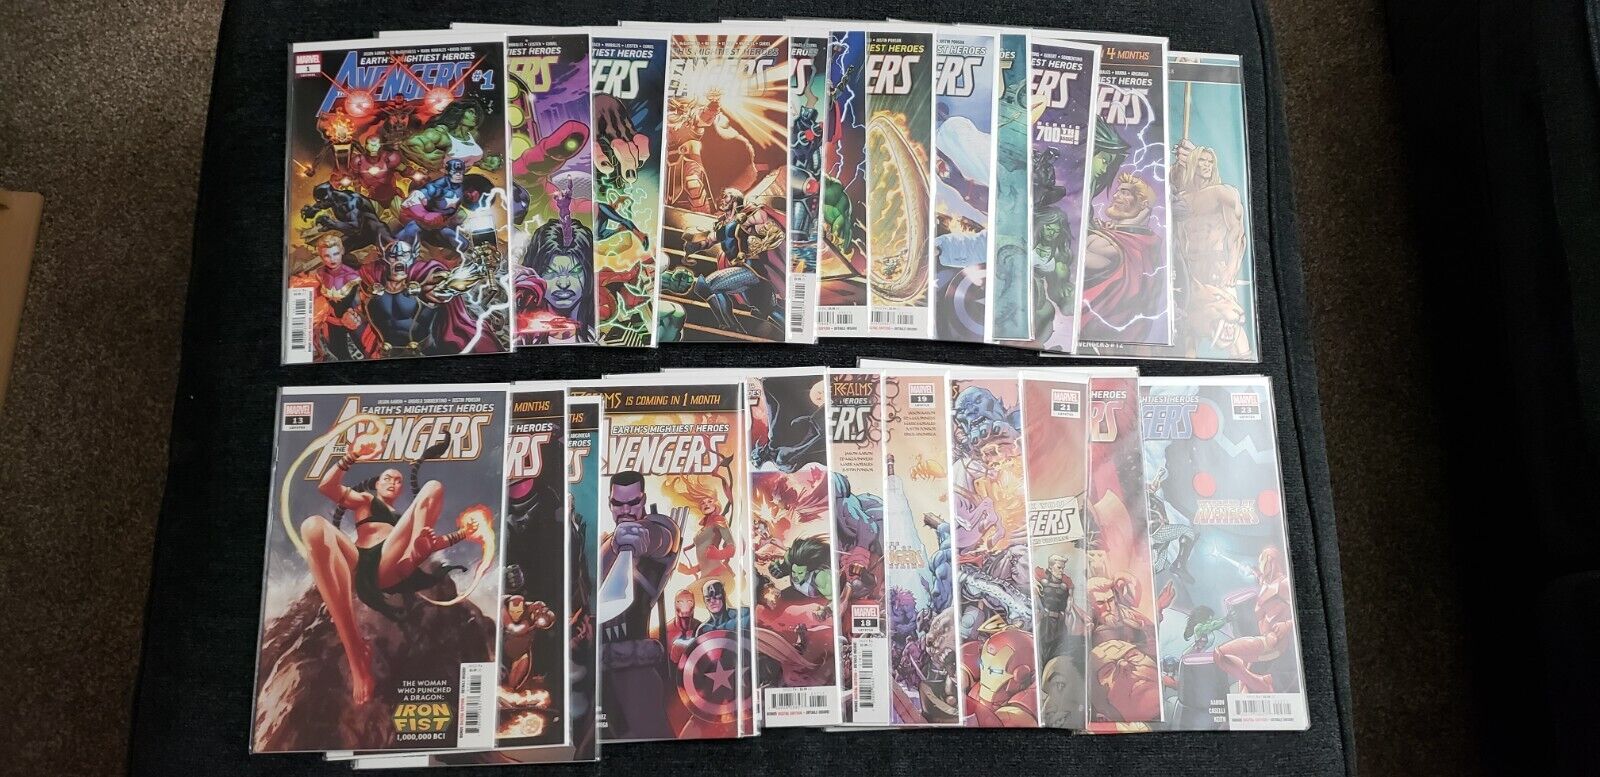 Avengers Full series by Jason Aaron 1-66 and Annuals 2018